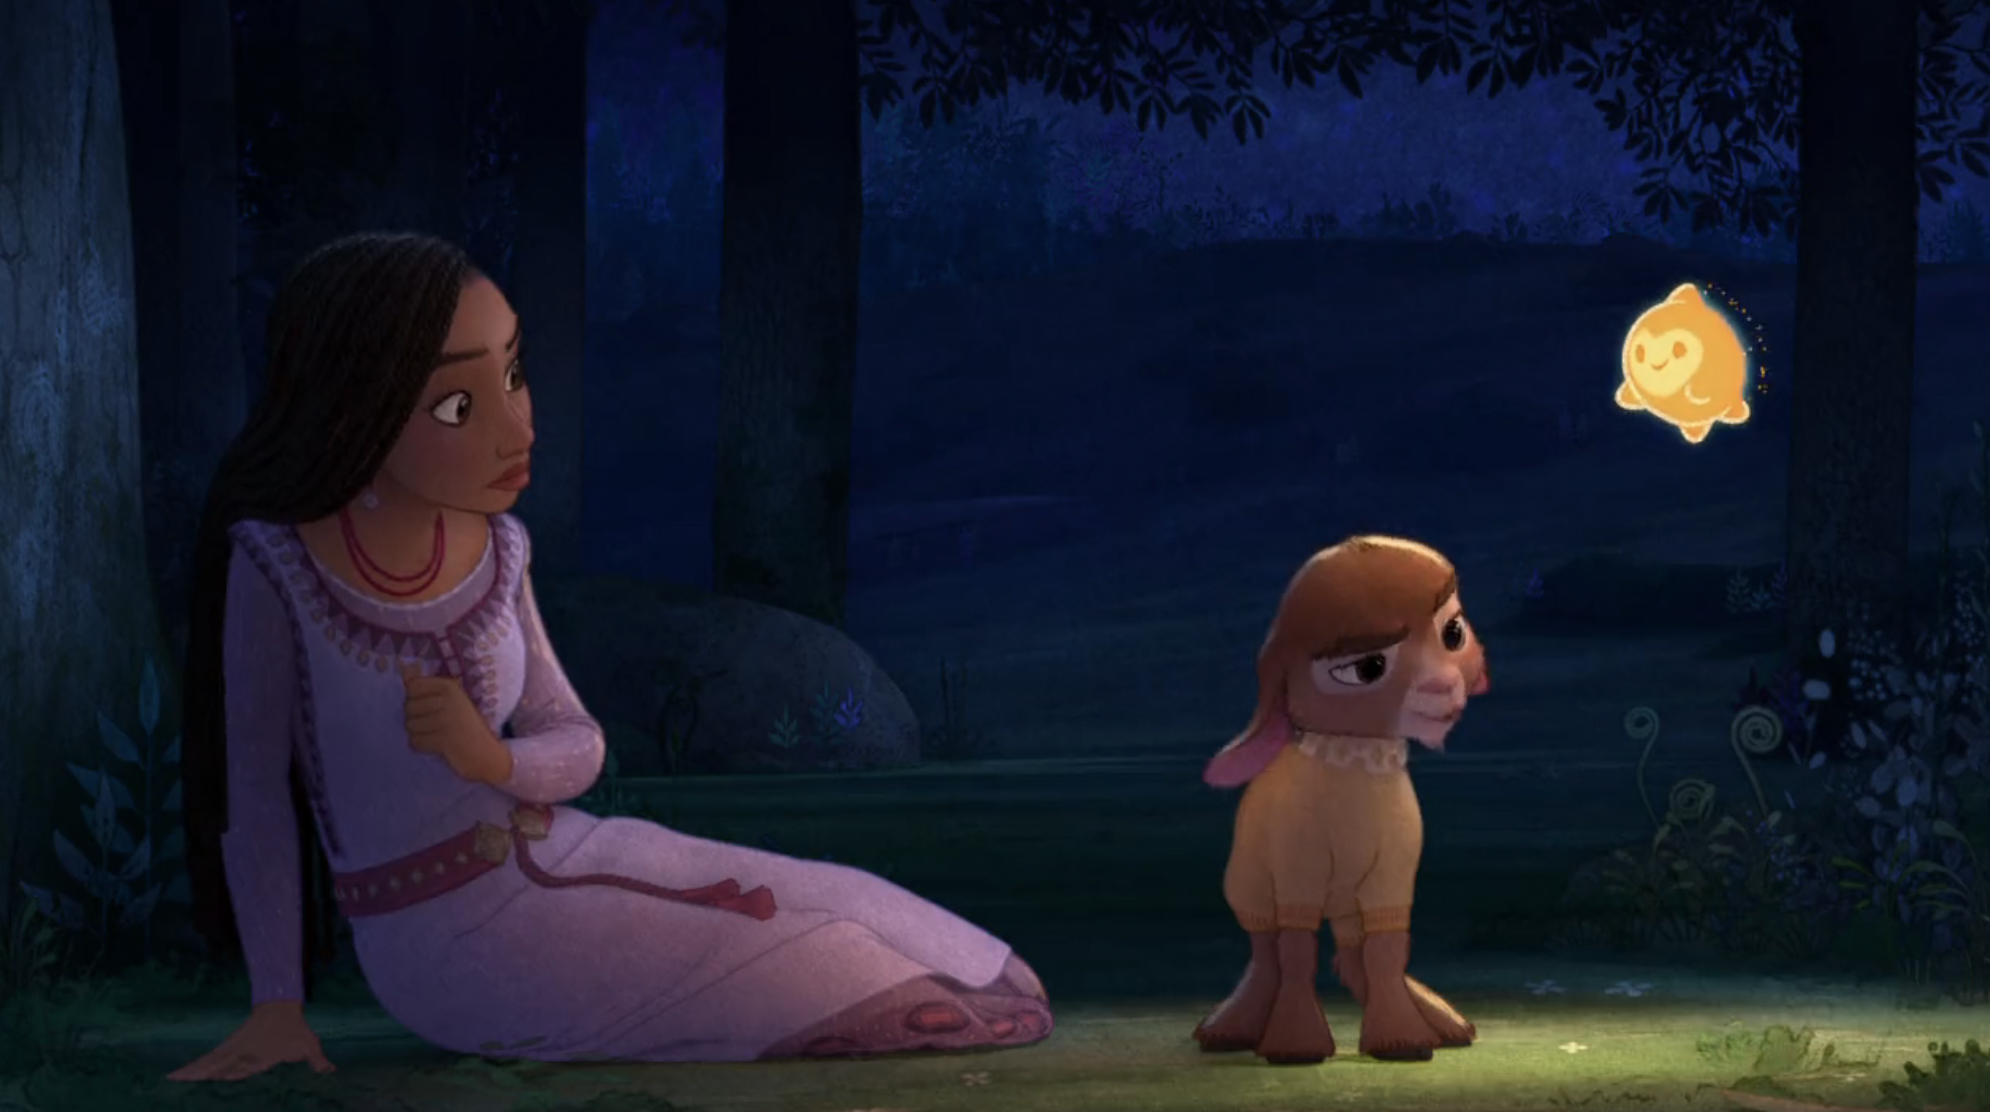 SEE IT: The First Trailer Disney’s Magical New Animated Film ‘Wish’